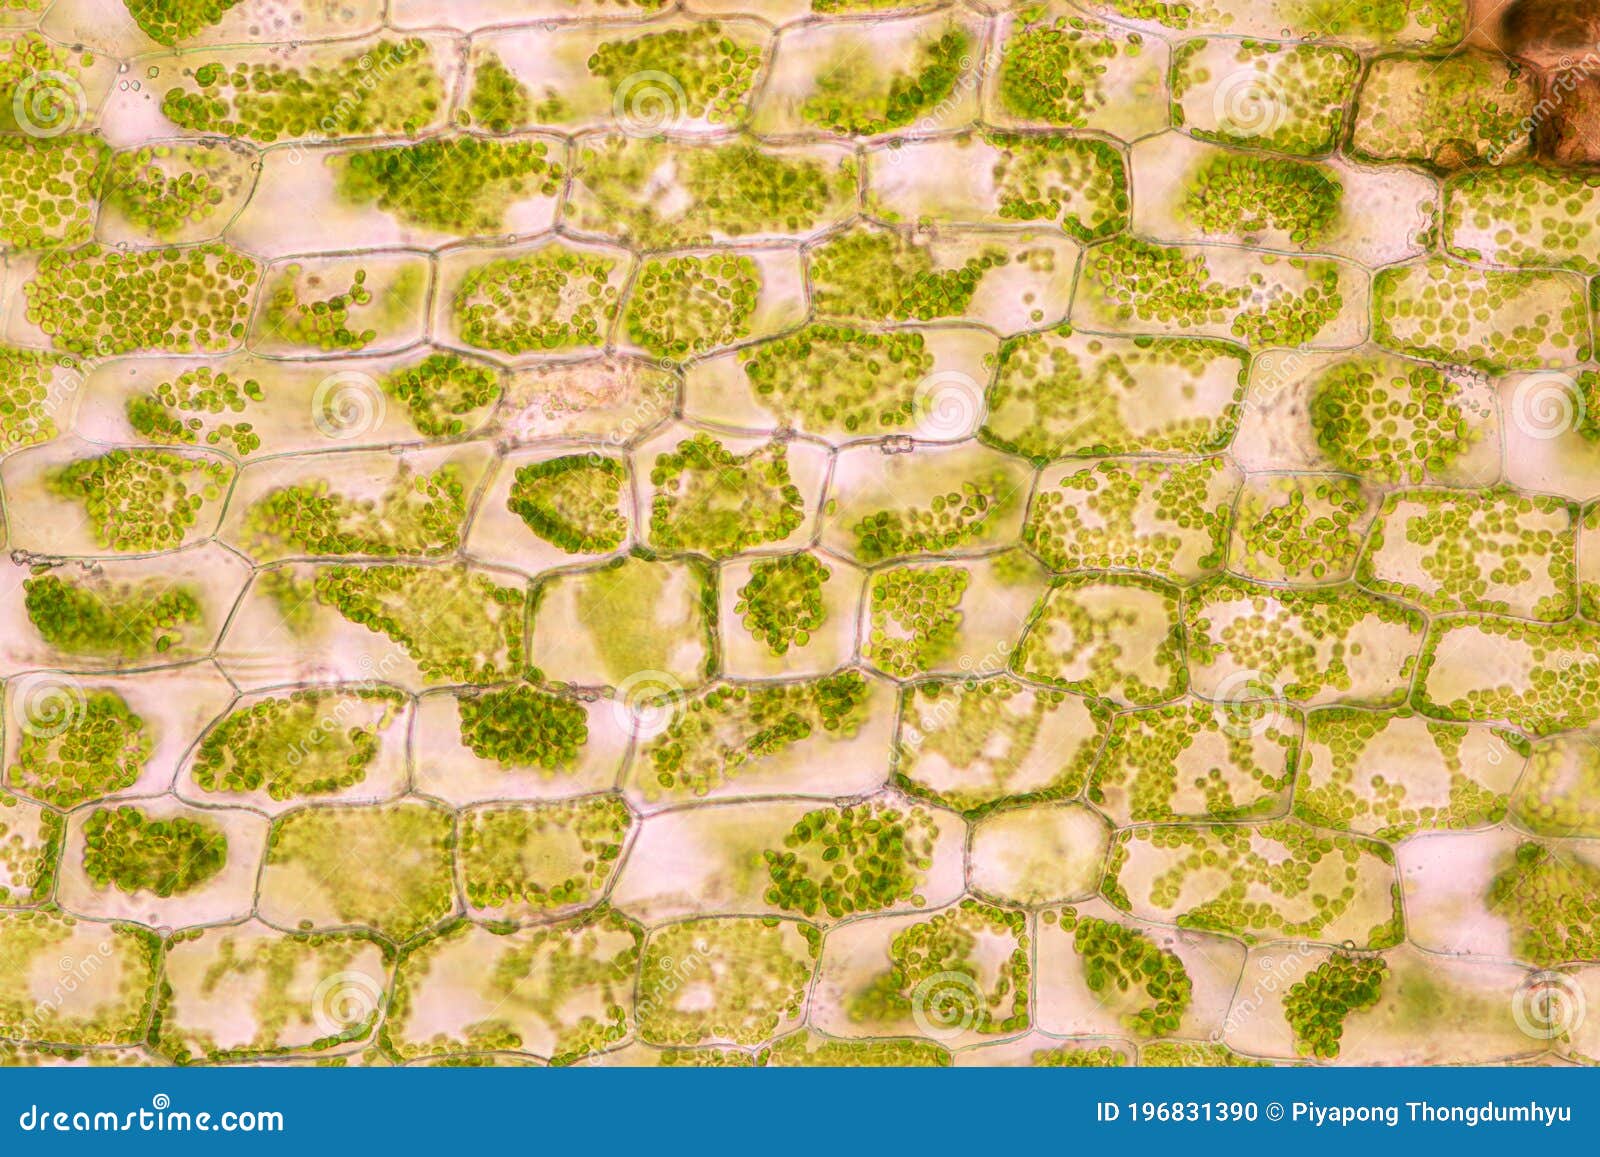 cell structure hydrilla, view of the leaf surface showing plant cells under the microscope.